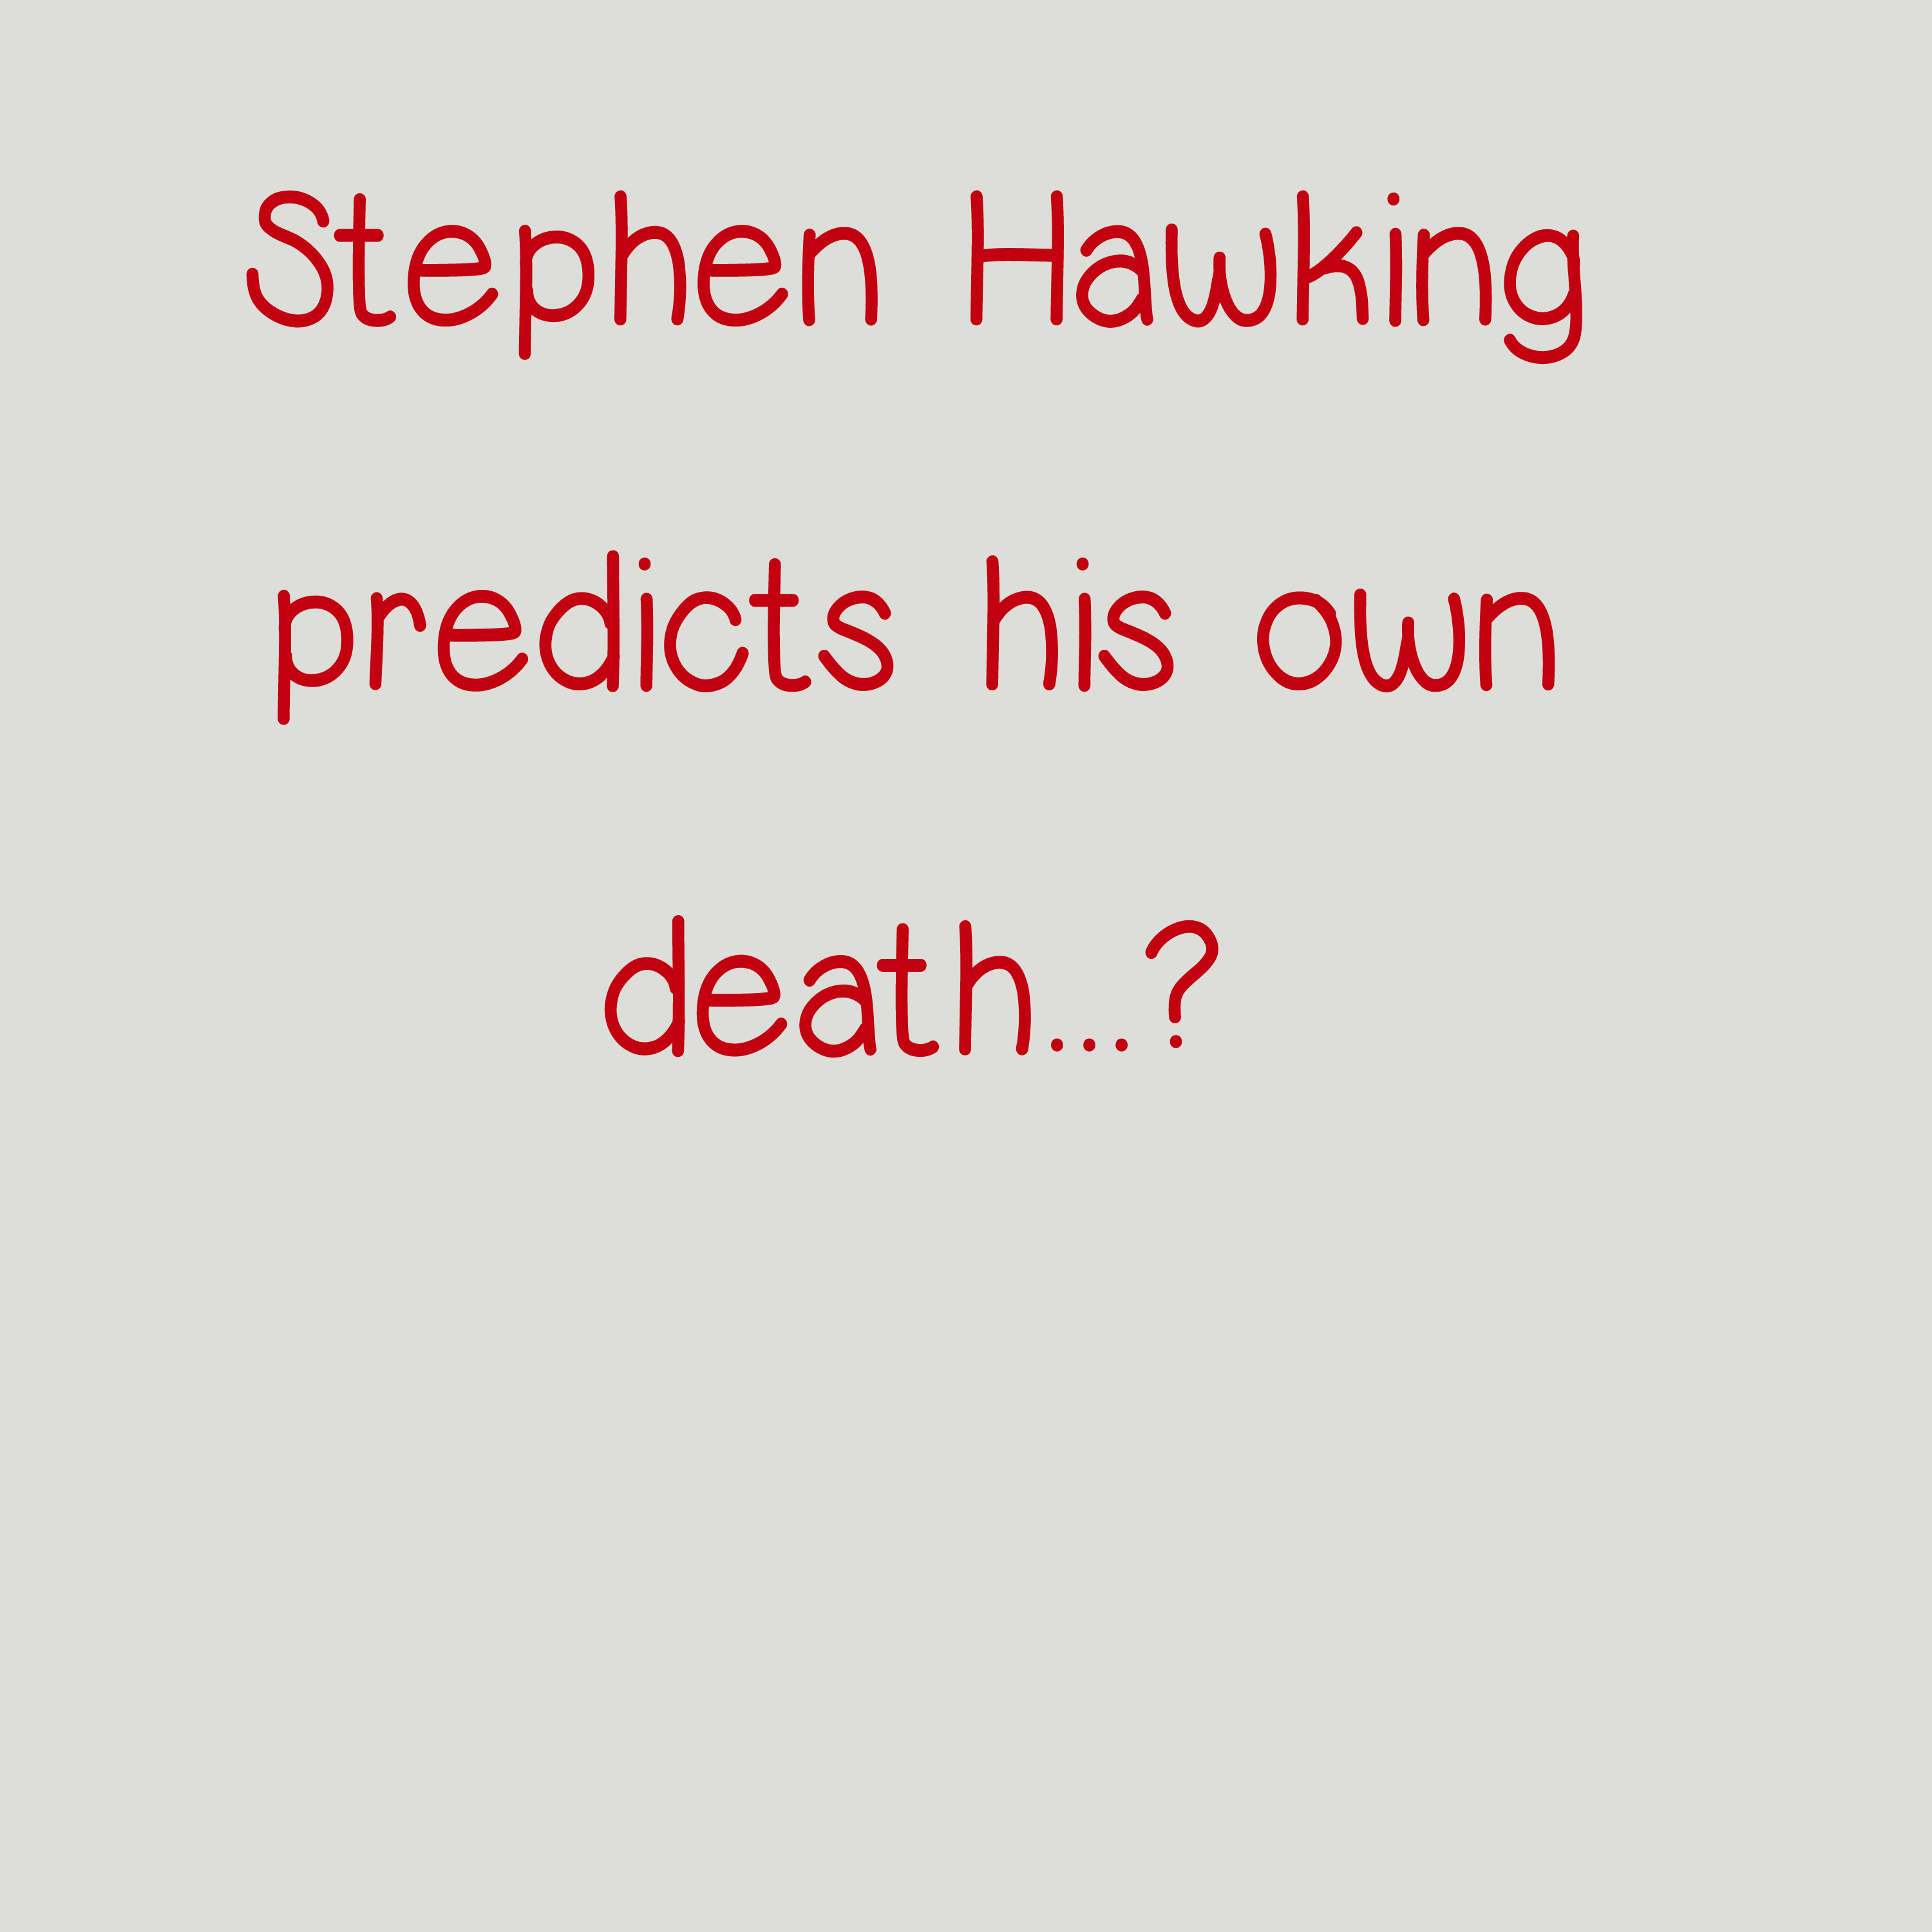 Stephen Hawking predicts his own death?.